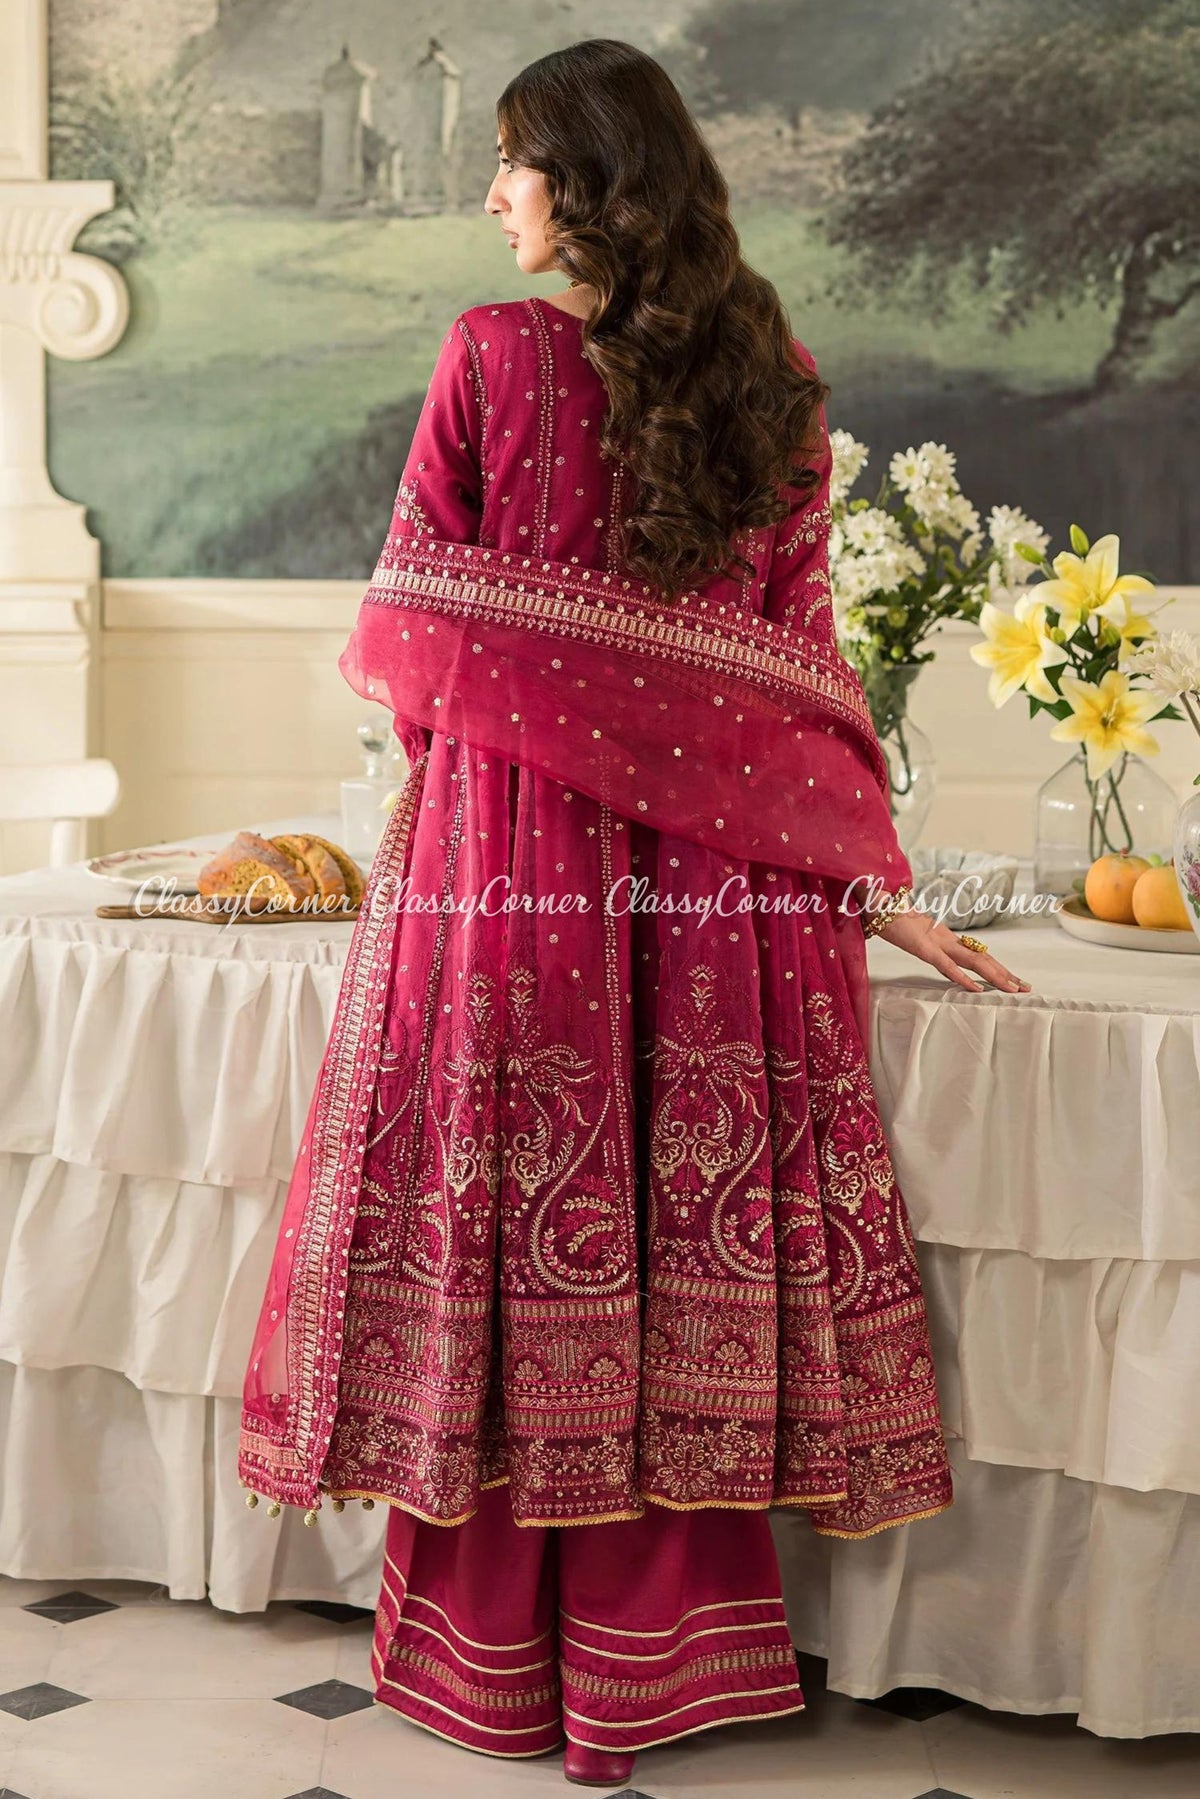 Pakistani wedding outfits for women in Sydney